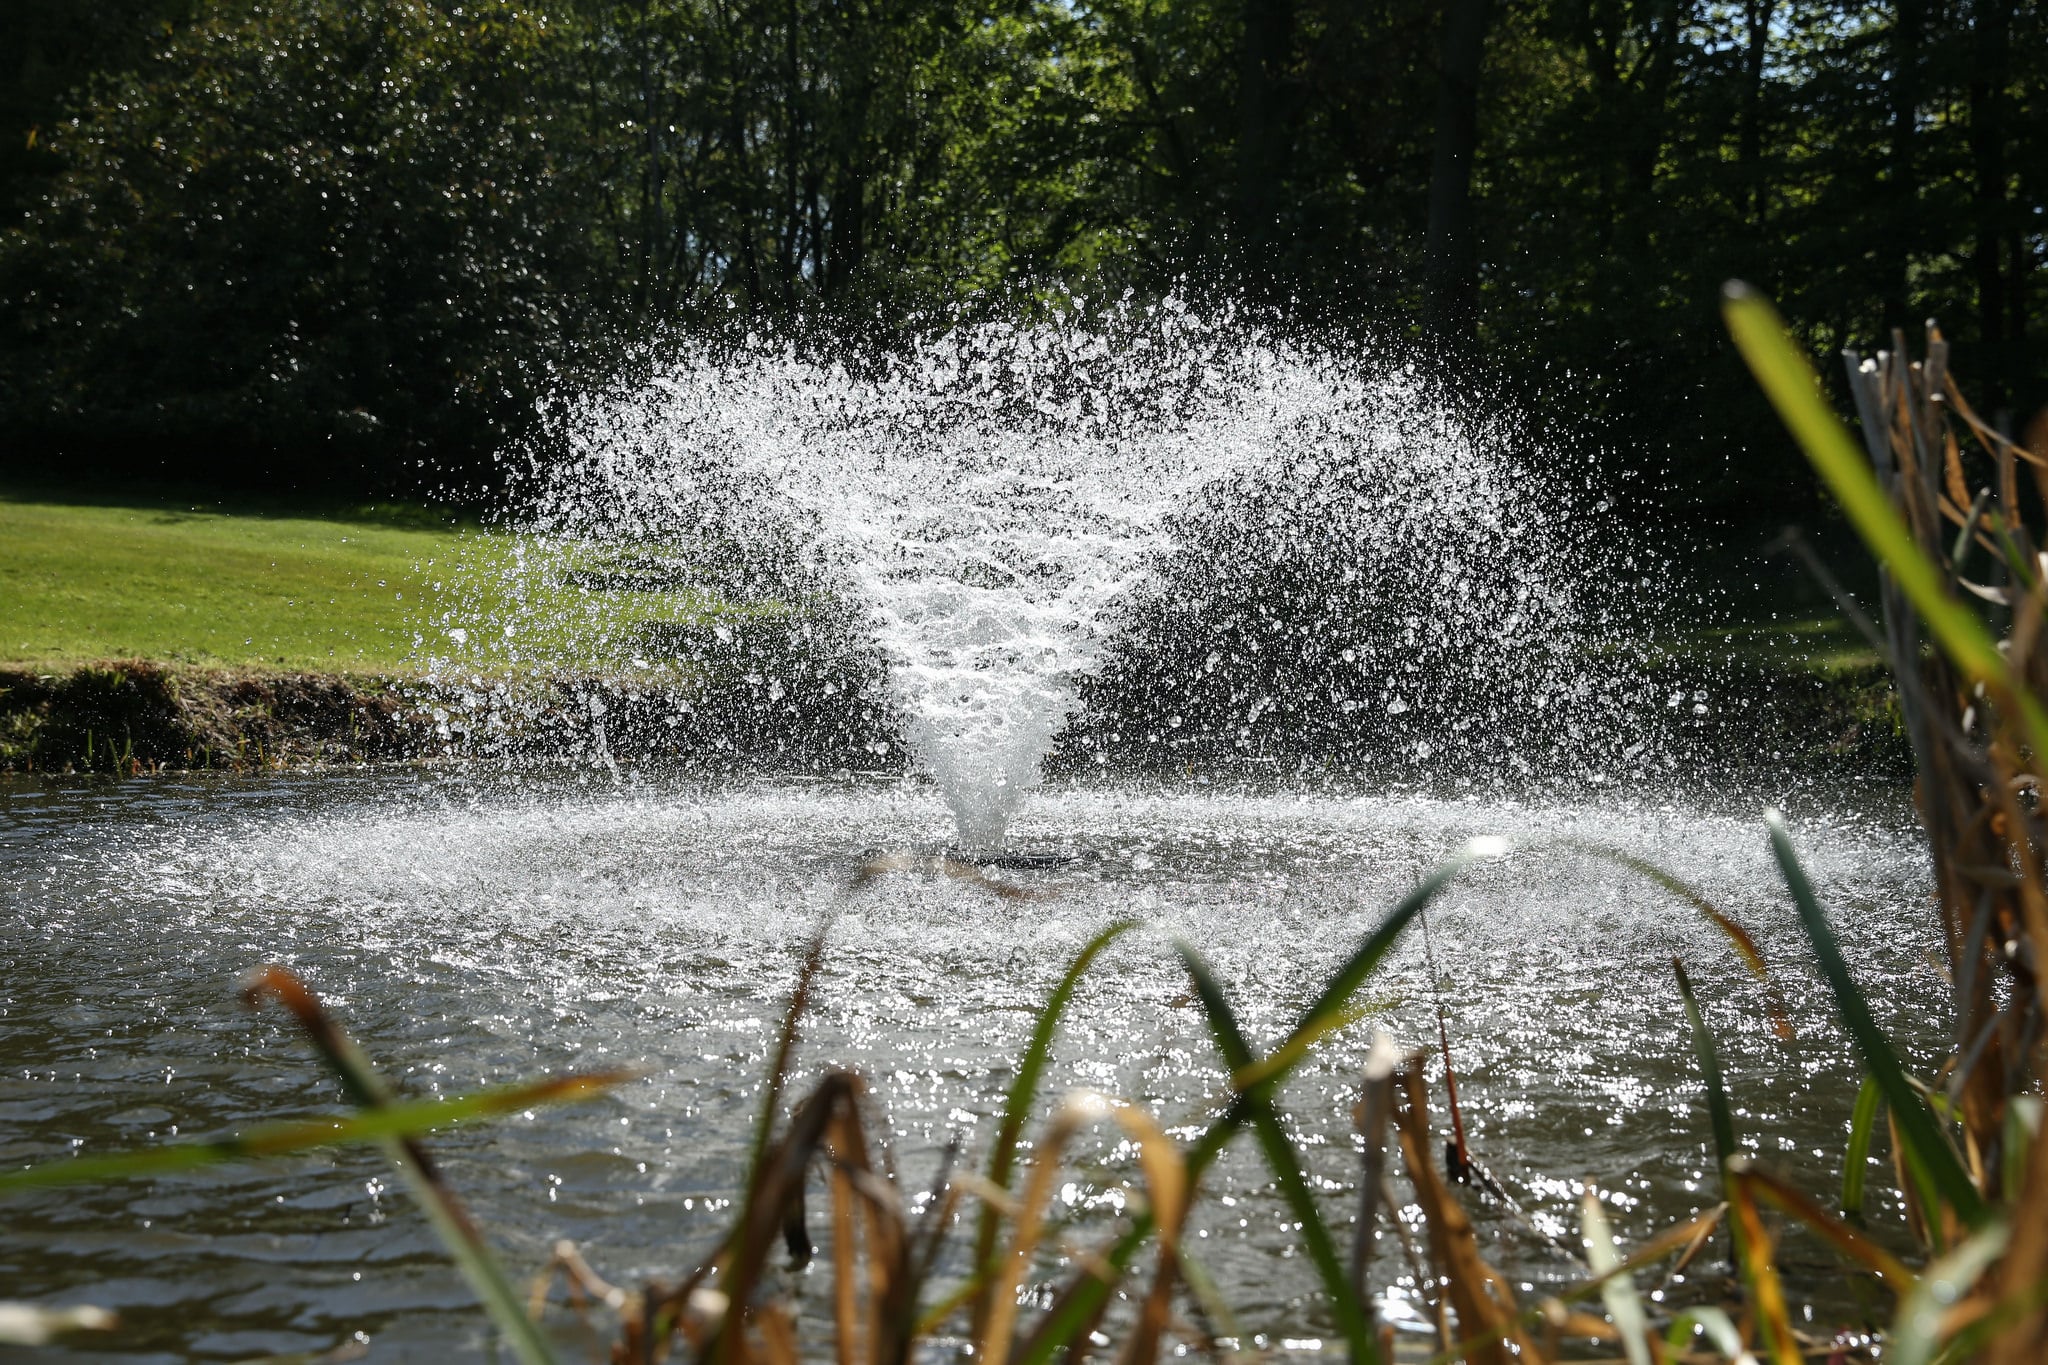 Brickendon's Otterbine aerating fountain in its body of water.